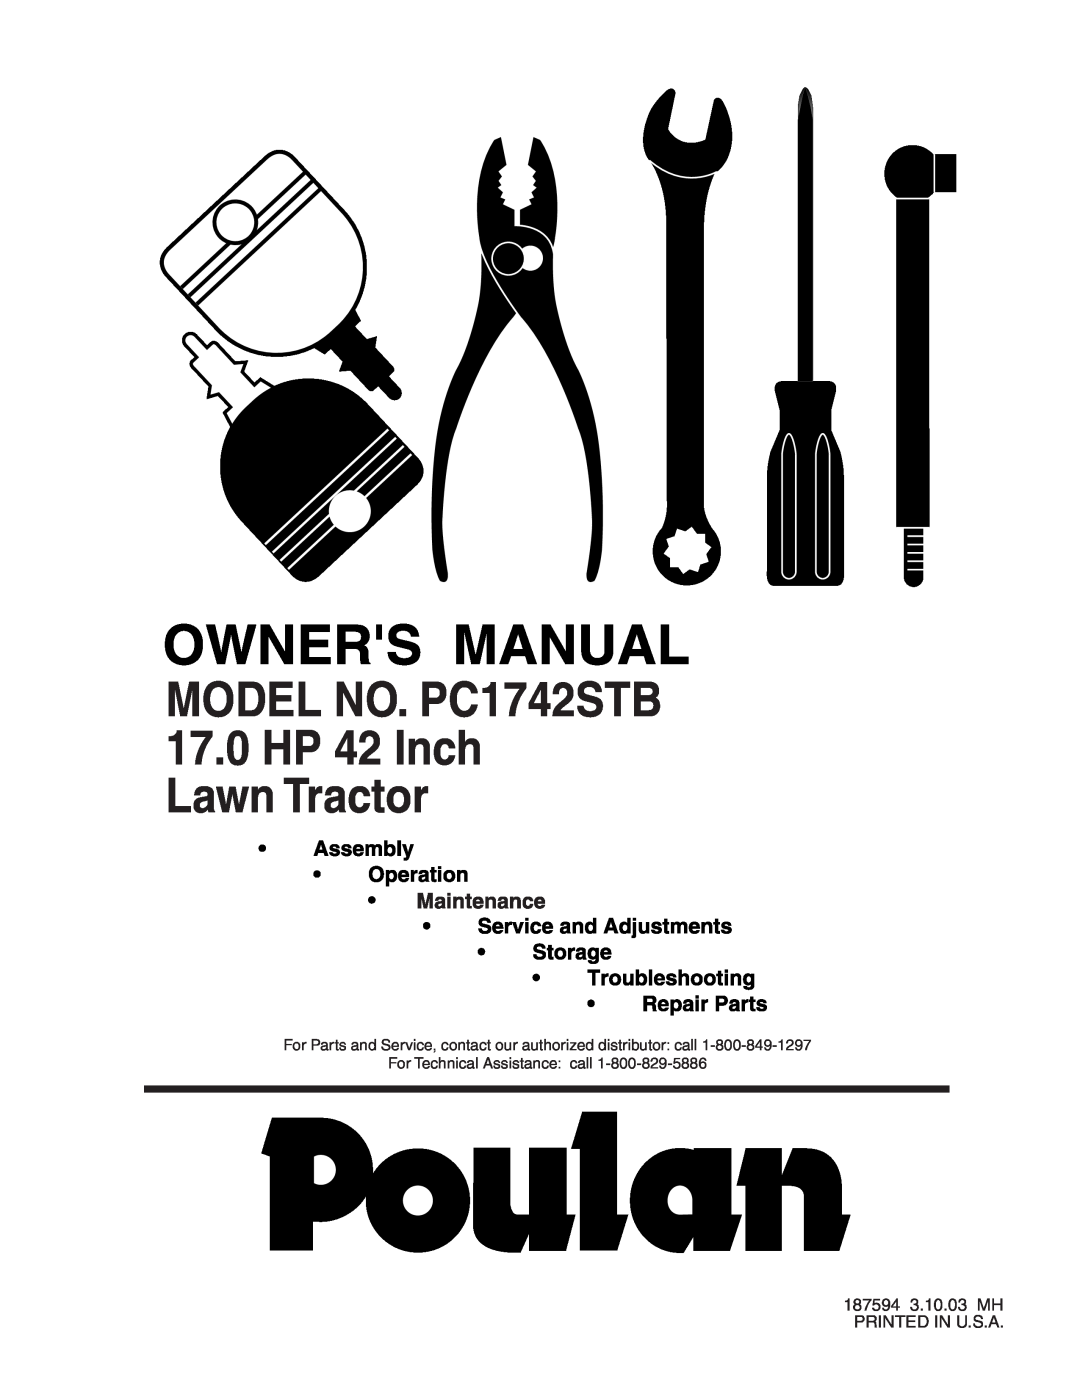 Poulan 187594 manual MODEL NO. PC1742STB 17.0 HP 42 Inch Lawn Tractor 